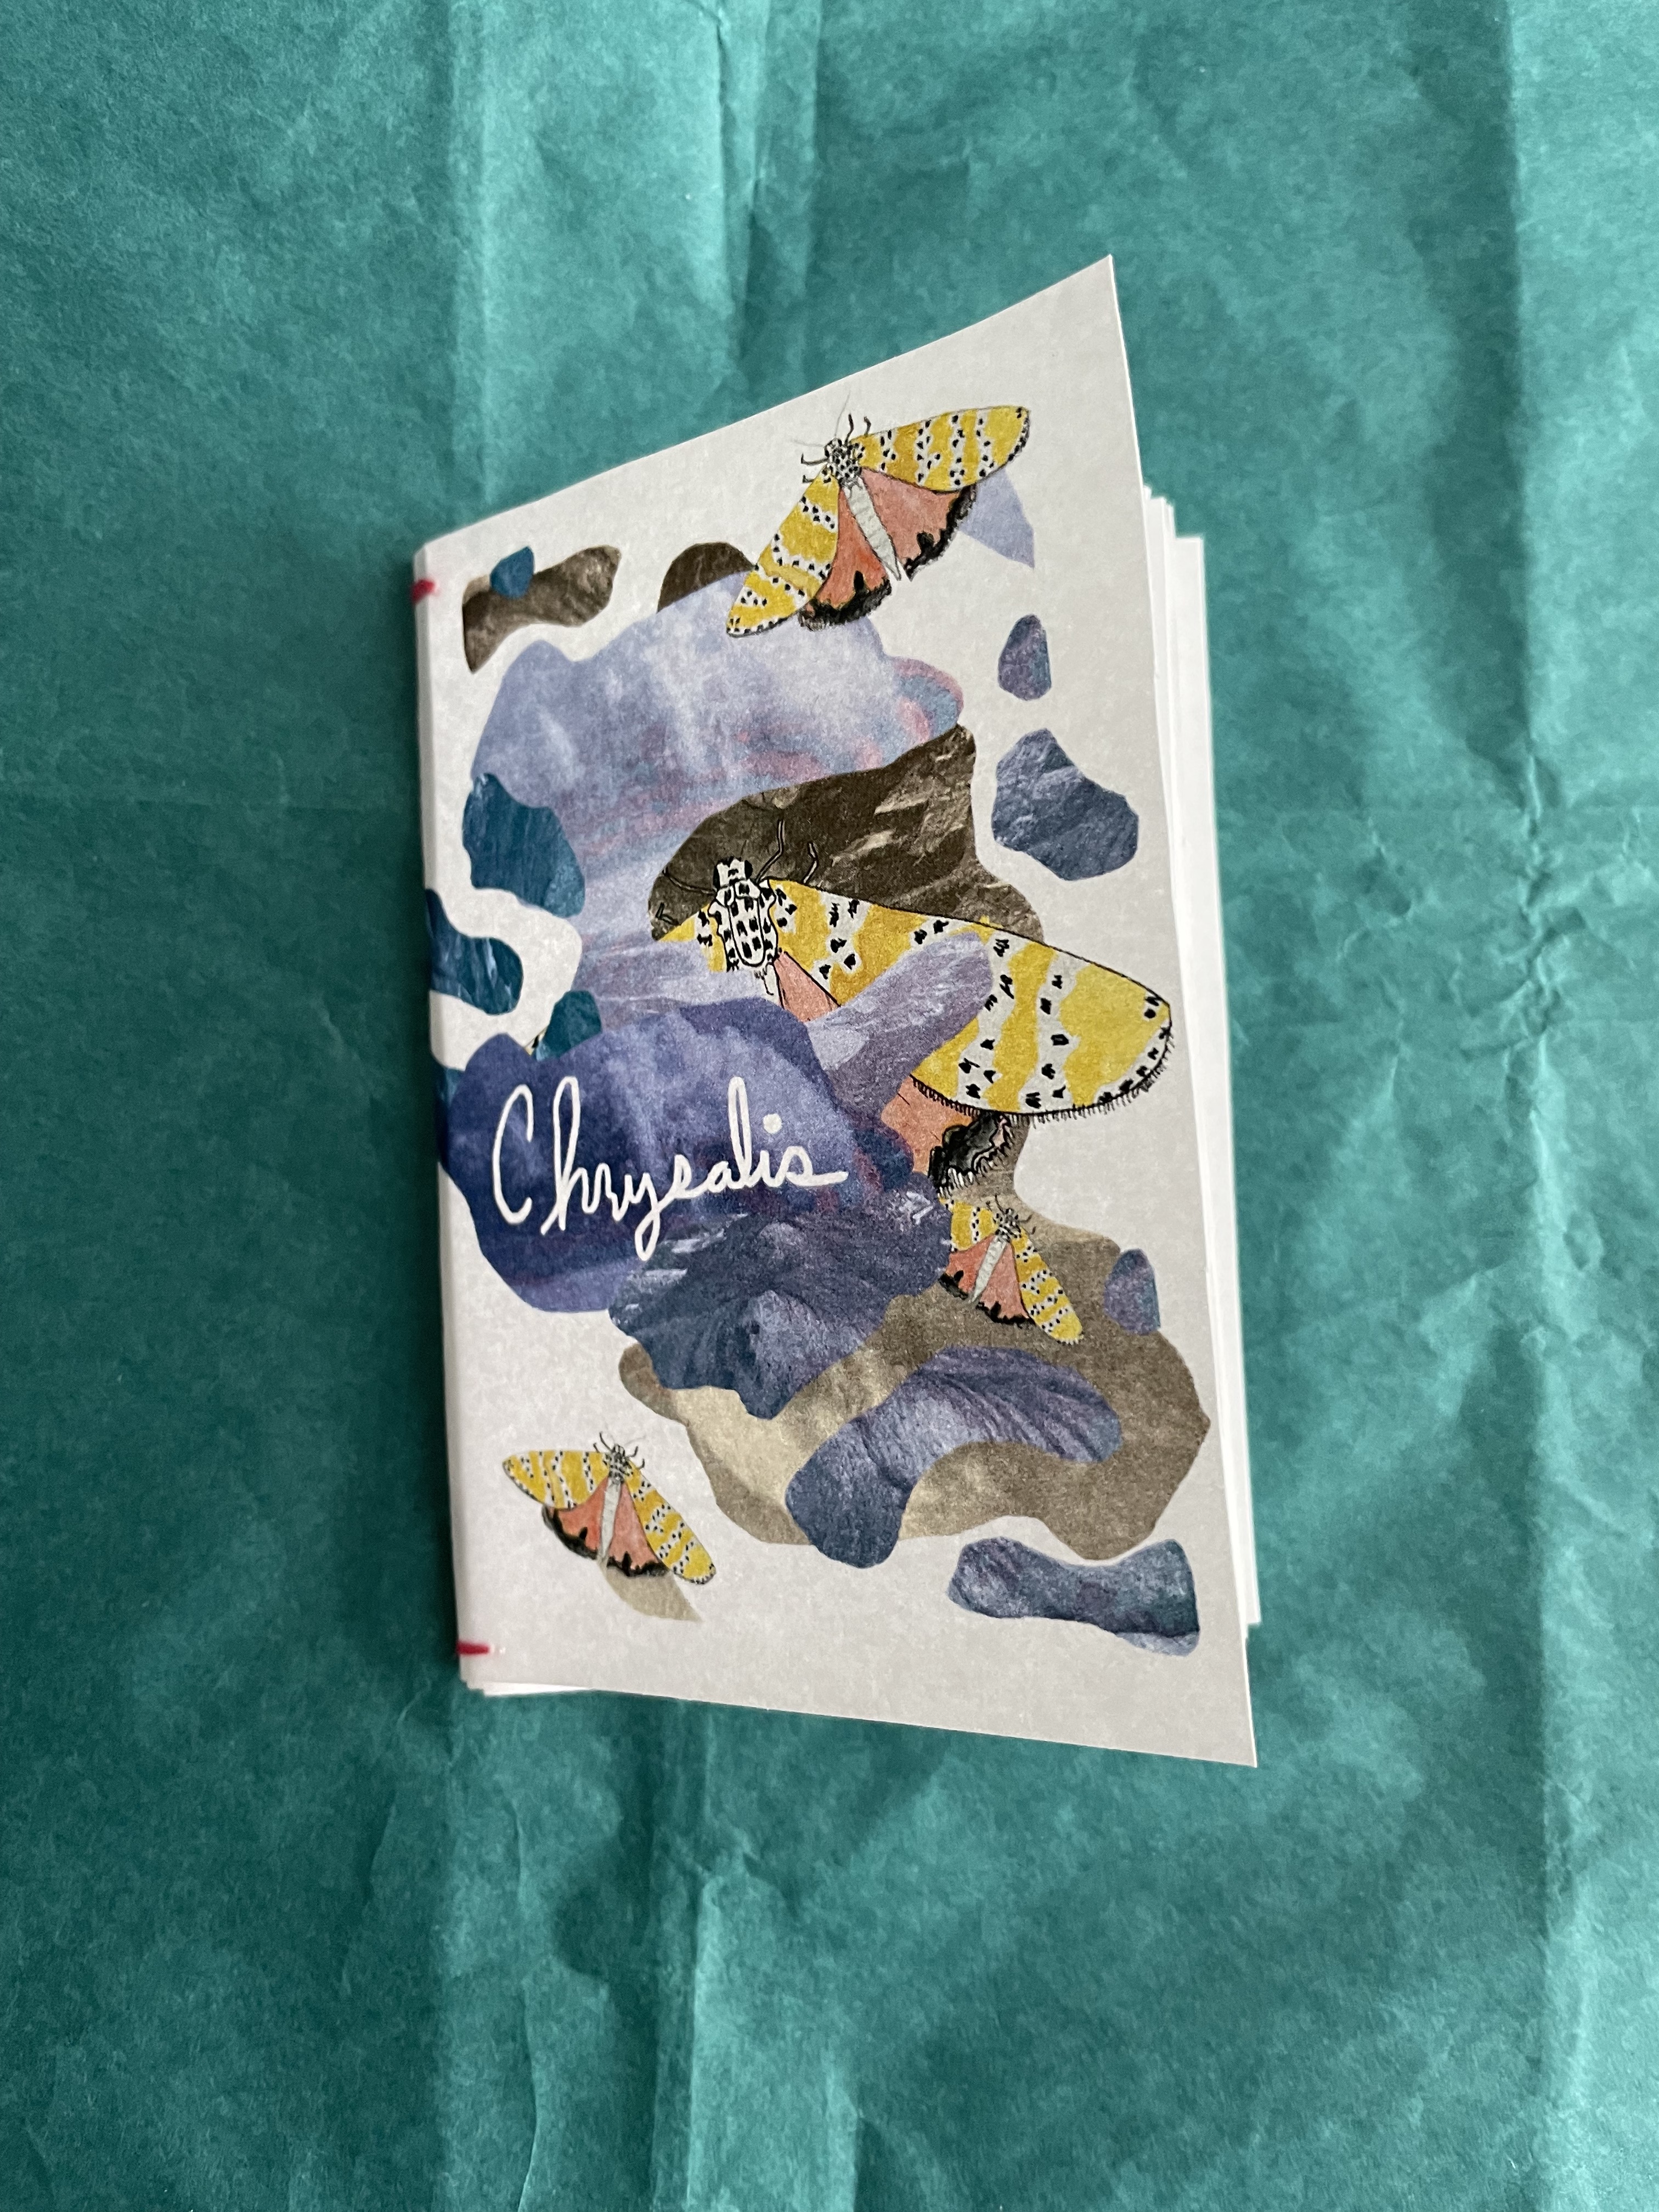 a poetry zine featuring a collage and a watercolor moth on the cover against a teal background